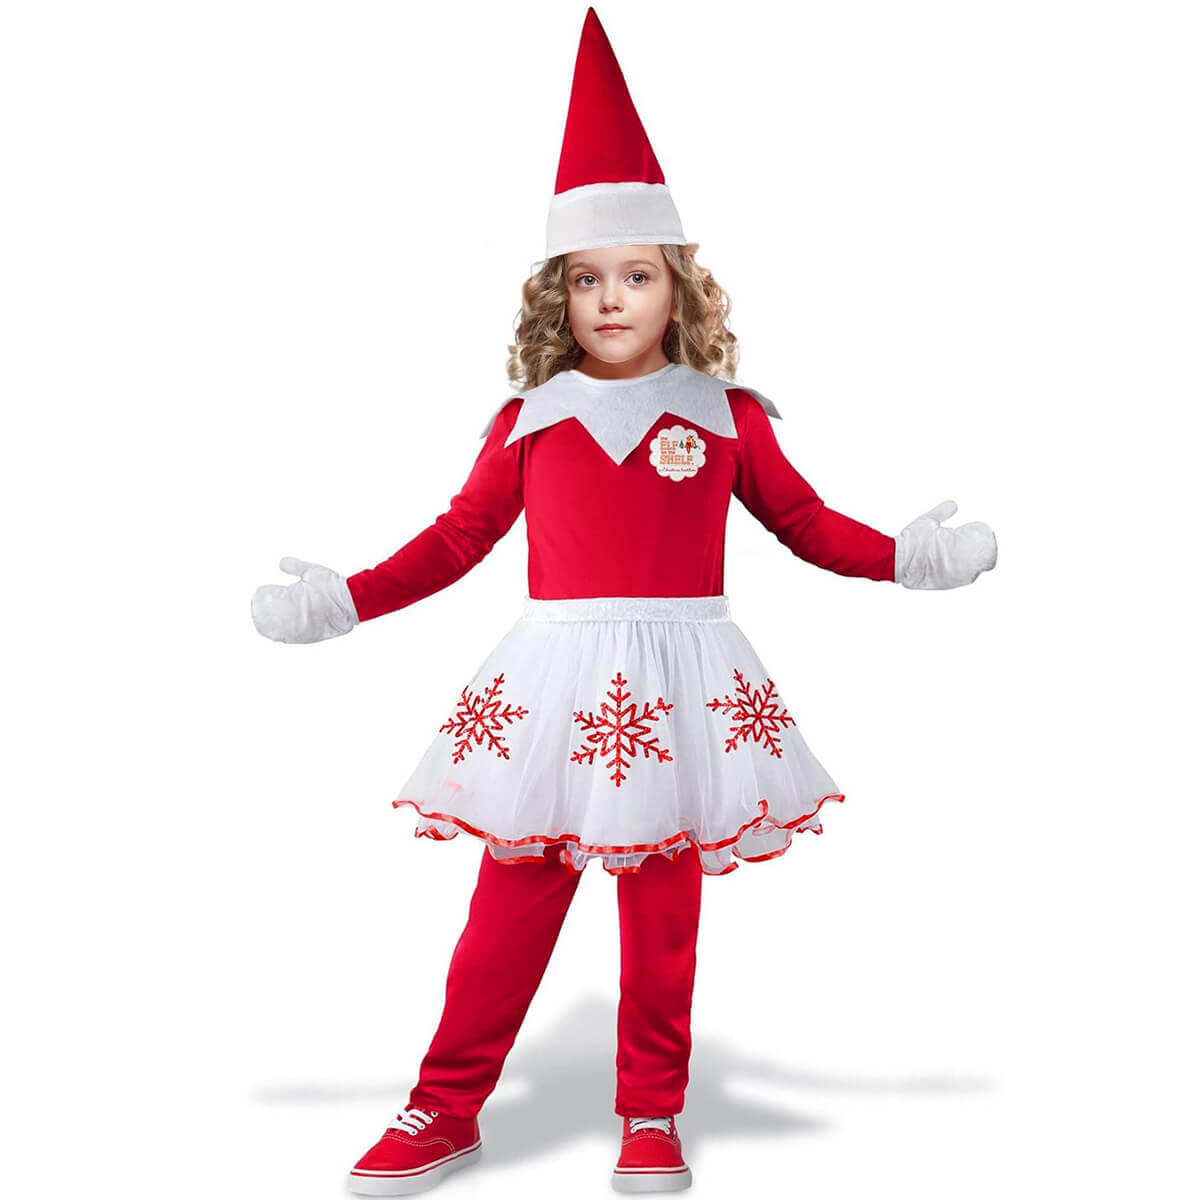 Christmas Elf Costume Mommy and Me Matching Christmas Outfits Jumpsuit Skirt Hat and Mittens 4pcs Suit